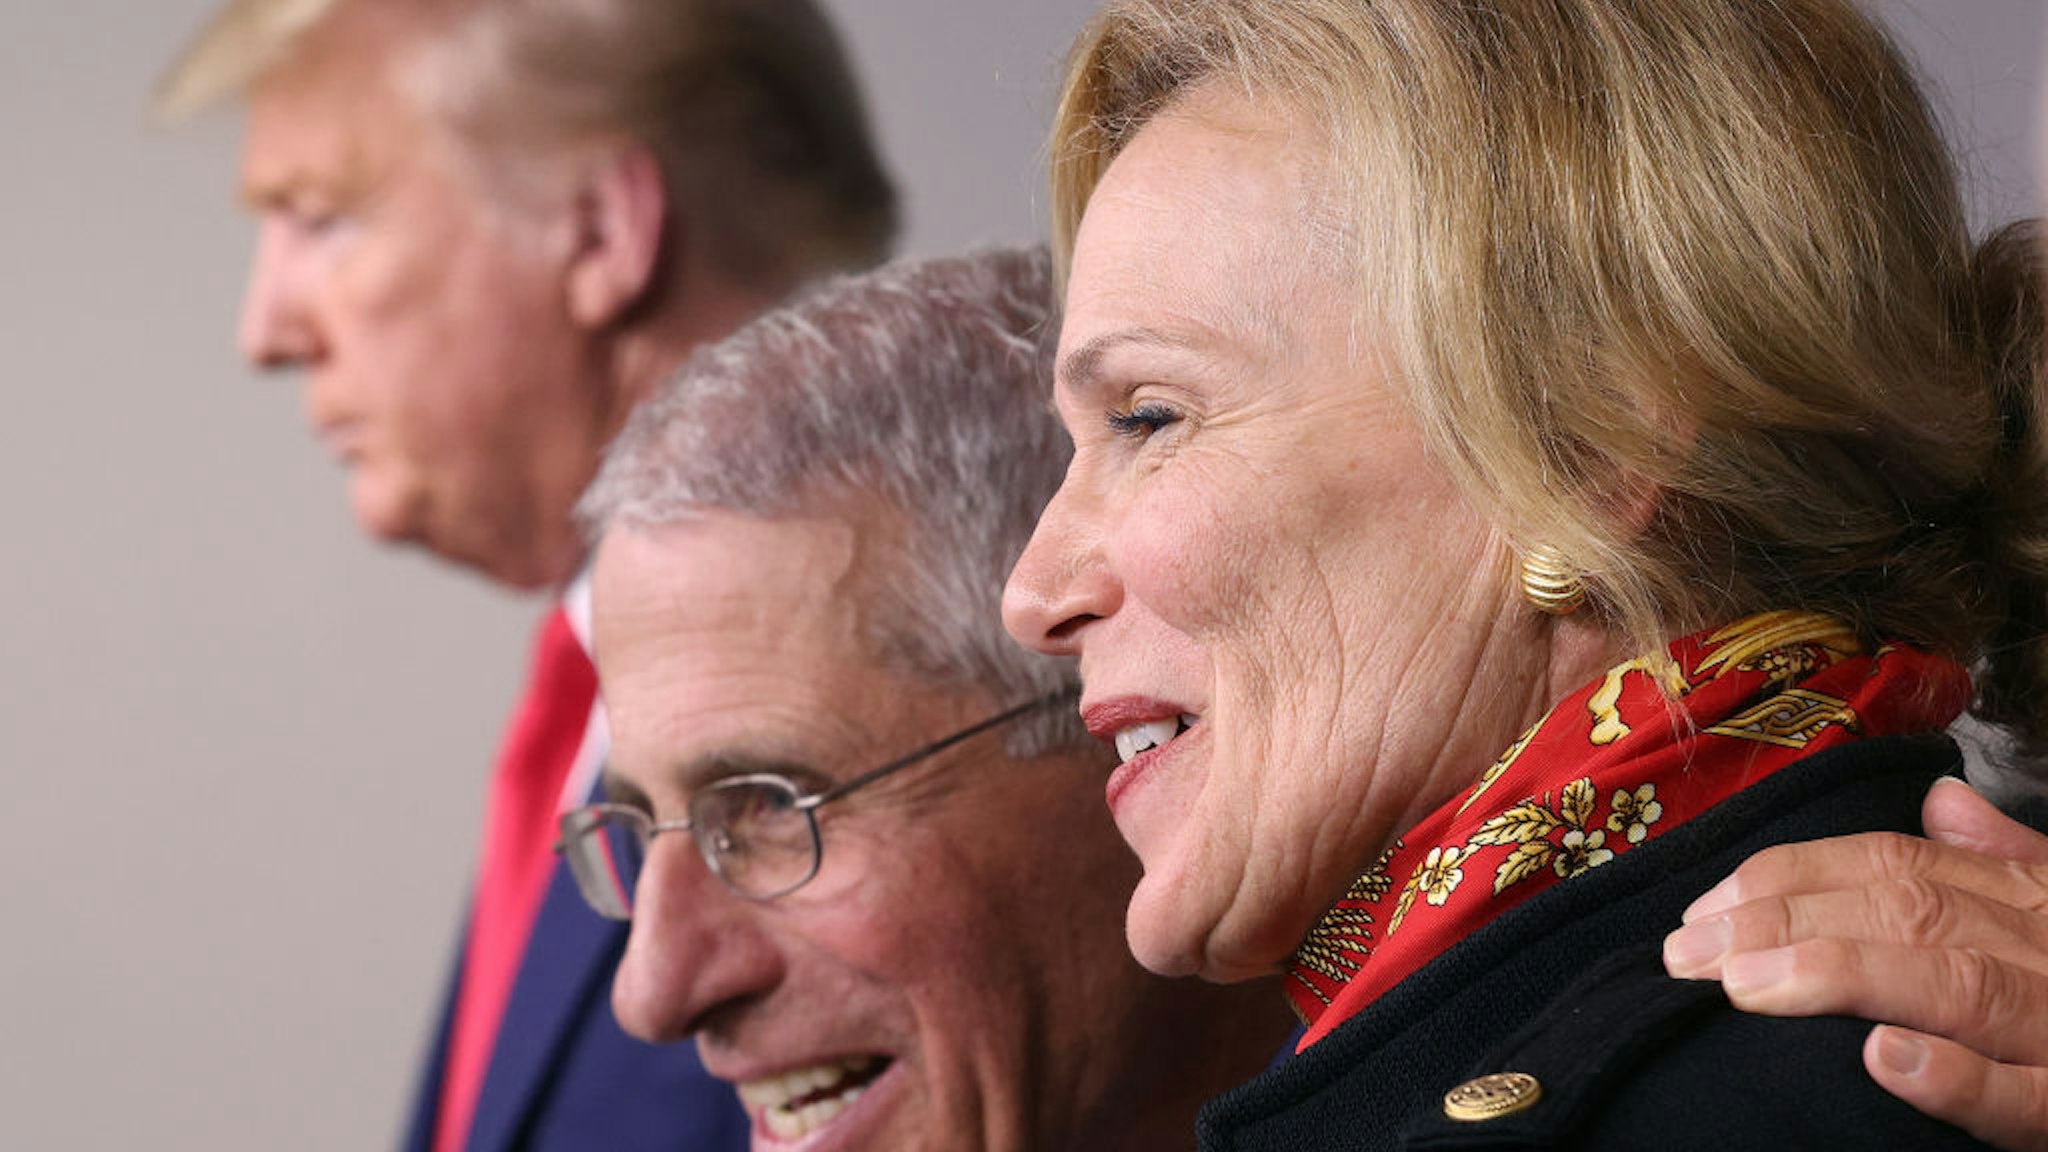 President Donald Trump, Dr. Anthony Fauci, director of the National Institute of Allergy and Infectious Diseases, and White House coronavirus response coordinator Debbie Birx, participate in the daily coronavirus task force briefing in the Brady Briefing room at the White House on March 31, 2020 in Washington, DC.